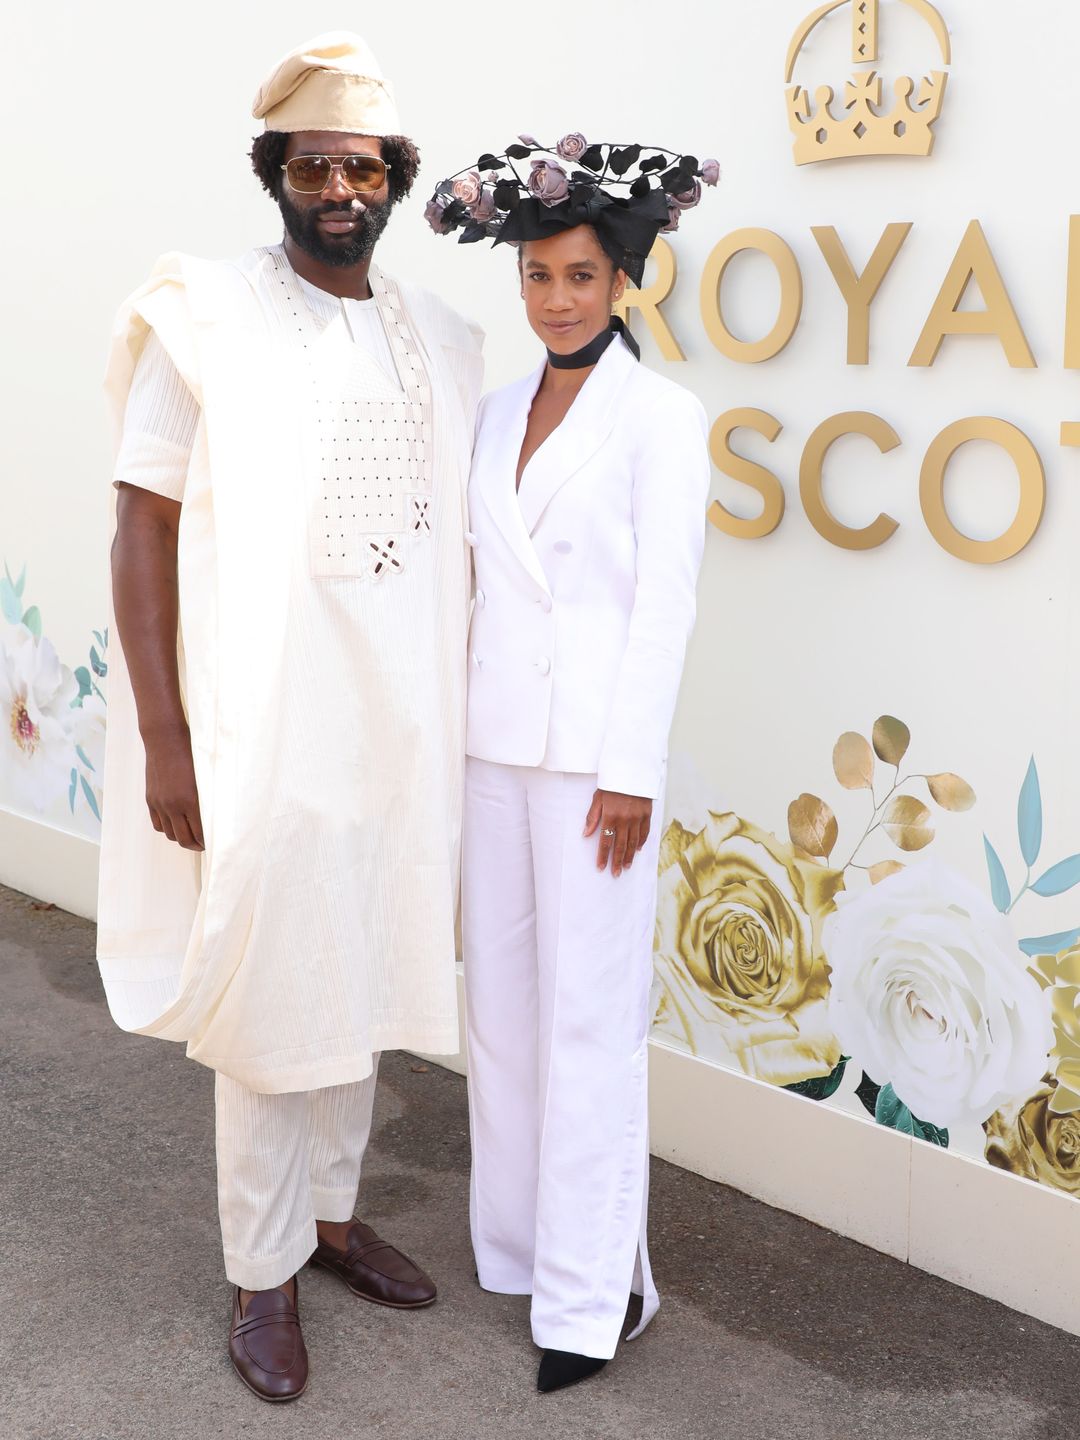 Actor Sope Dirisu and Dominique Tipper attend the Longines Royal Ascot private suite with Sope wearing formal Nigerian attire the latter opting for a Rachel Trevor Morgan headpiece and
Ted Baker suit 